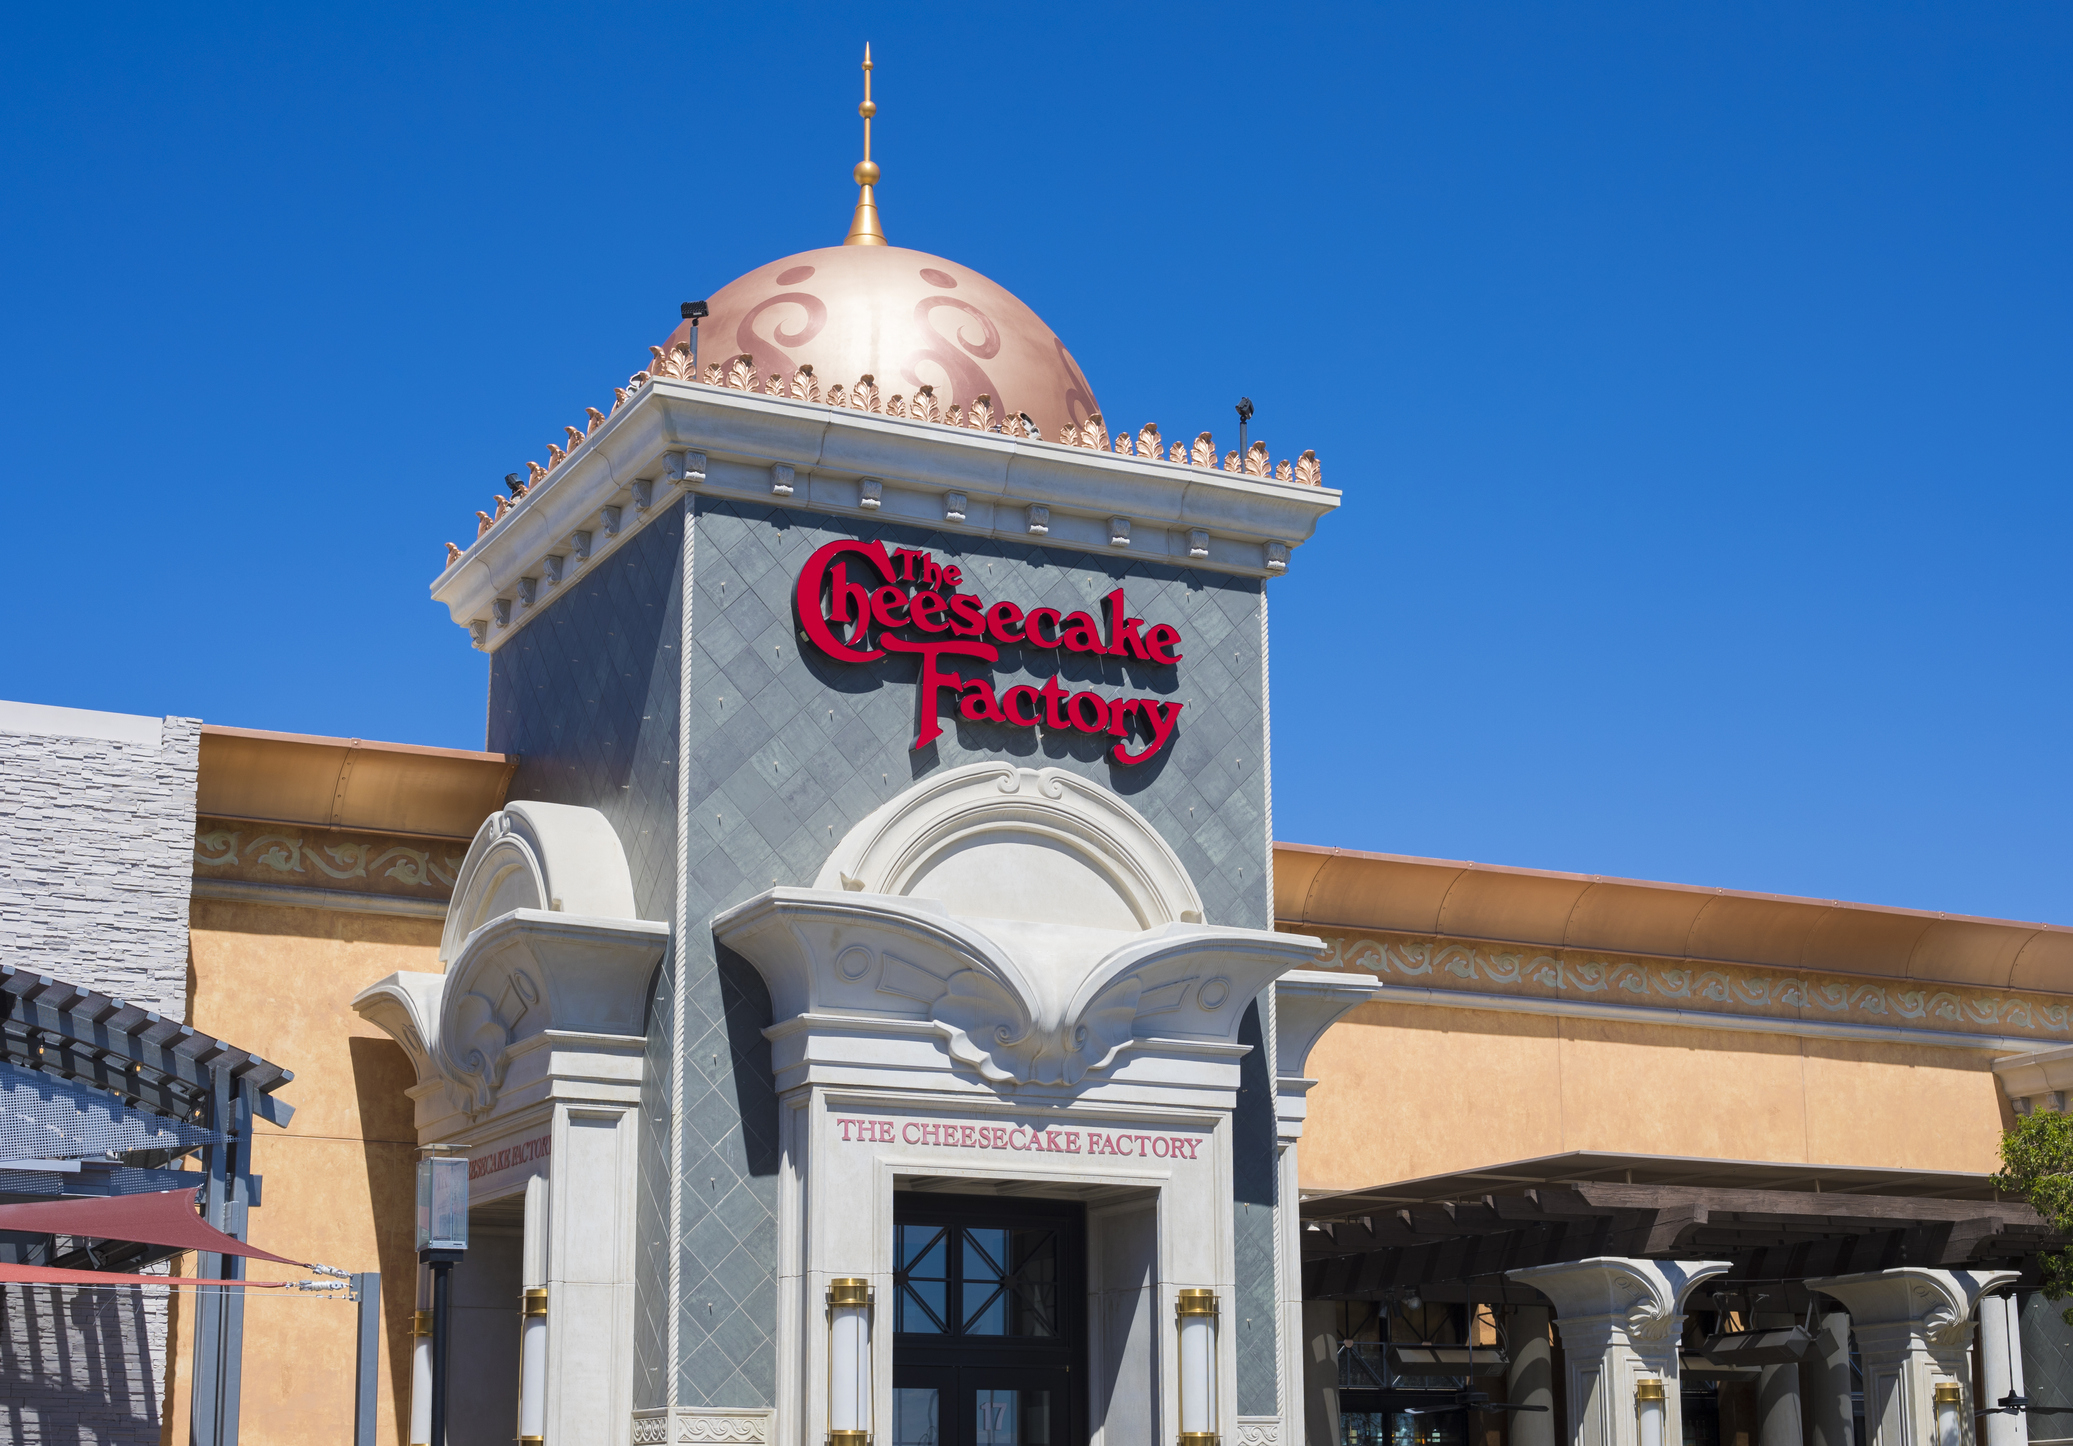 The Cheesecake Factory entrance